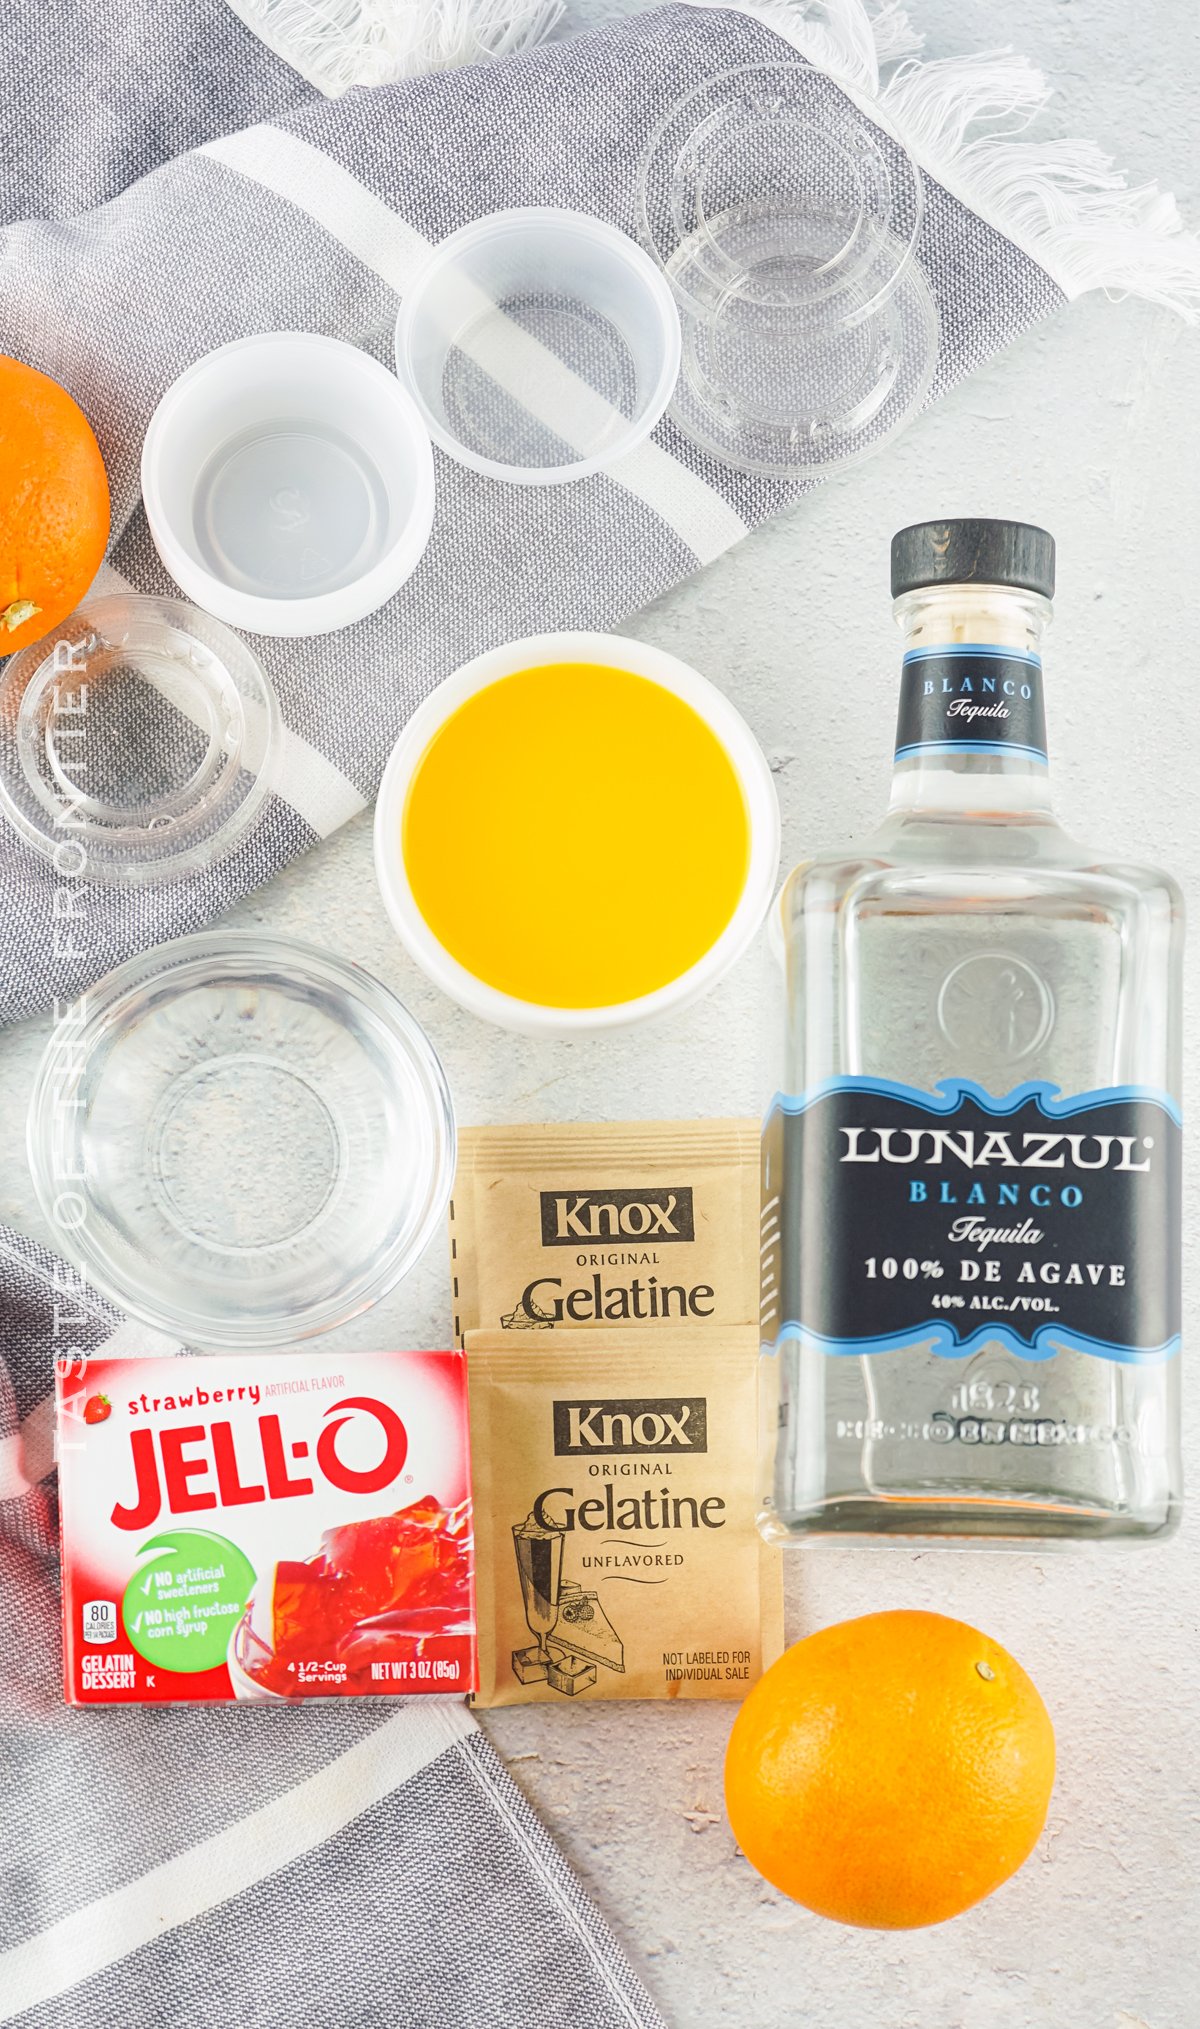 ingredients for Tequila Sunrise Jello Shots